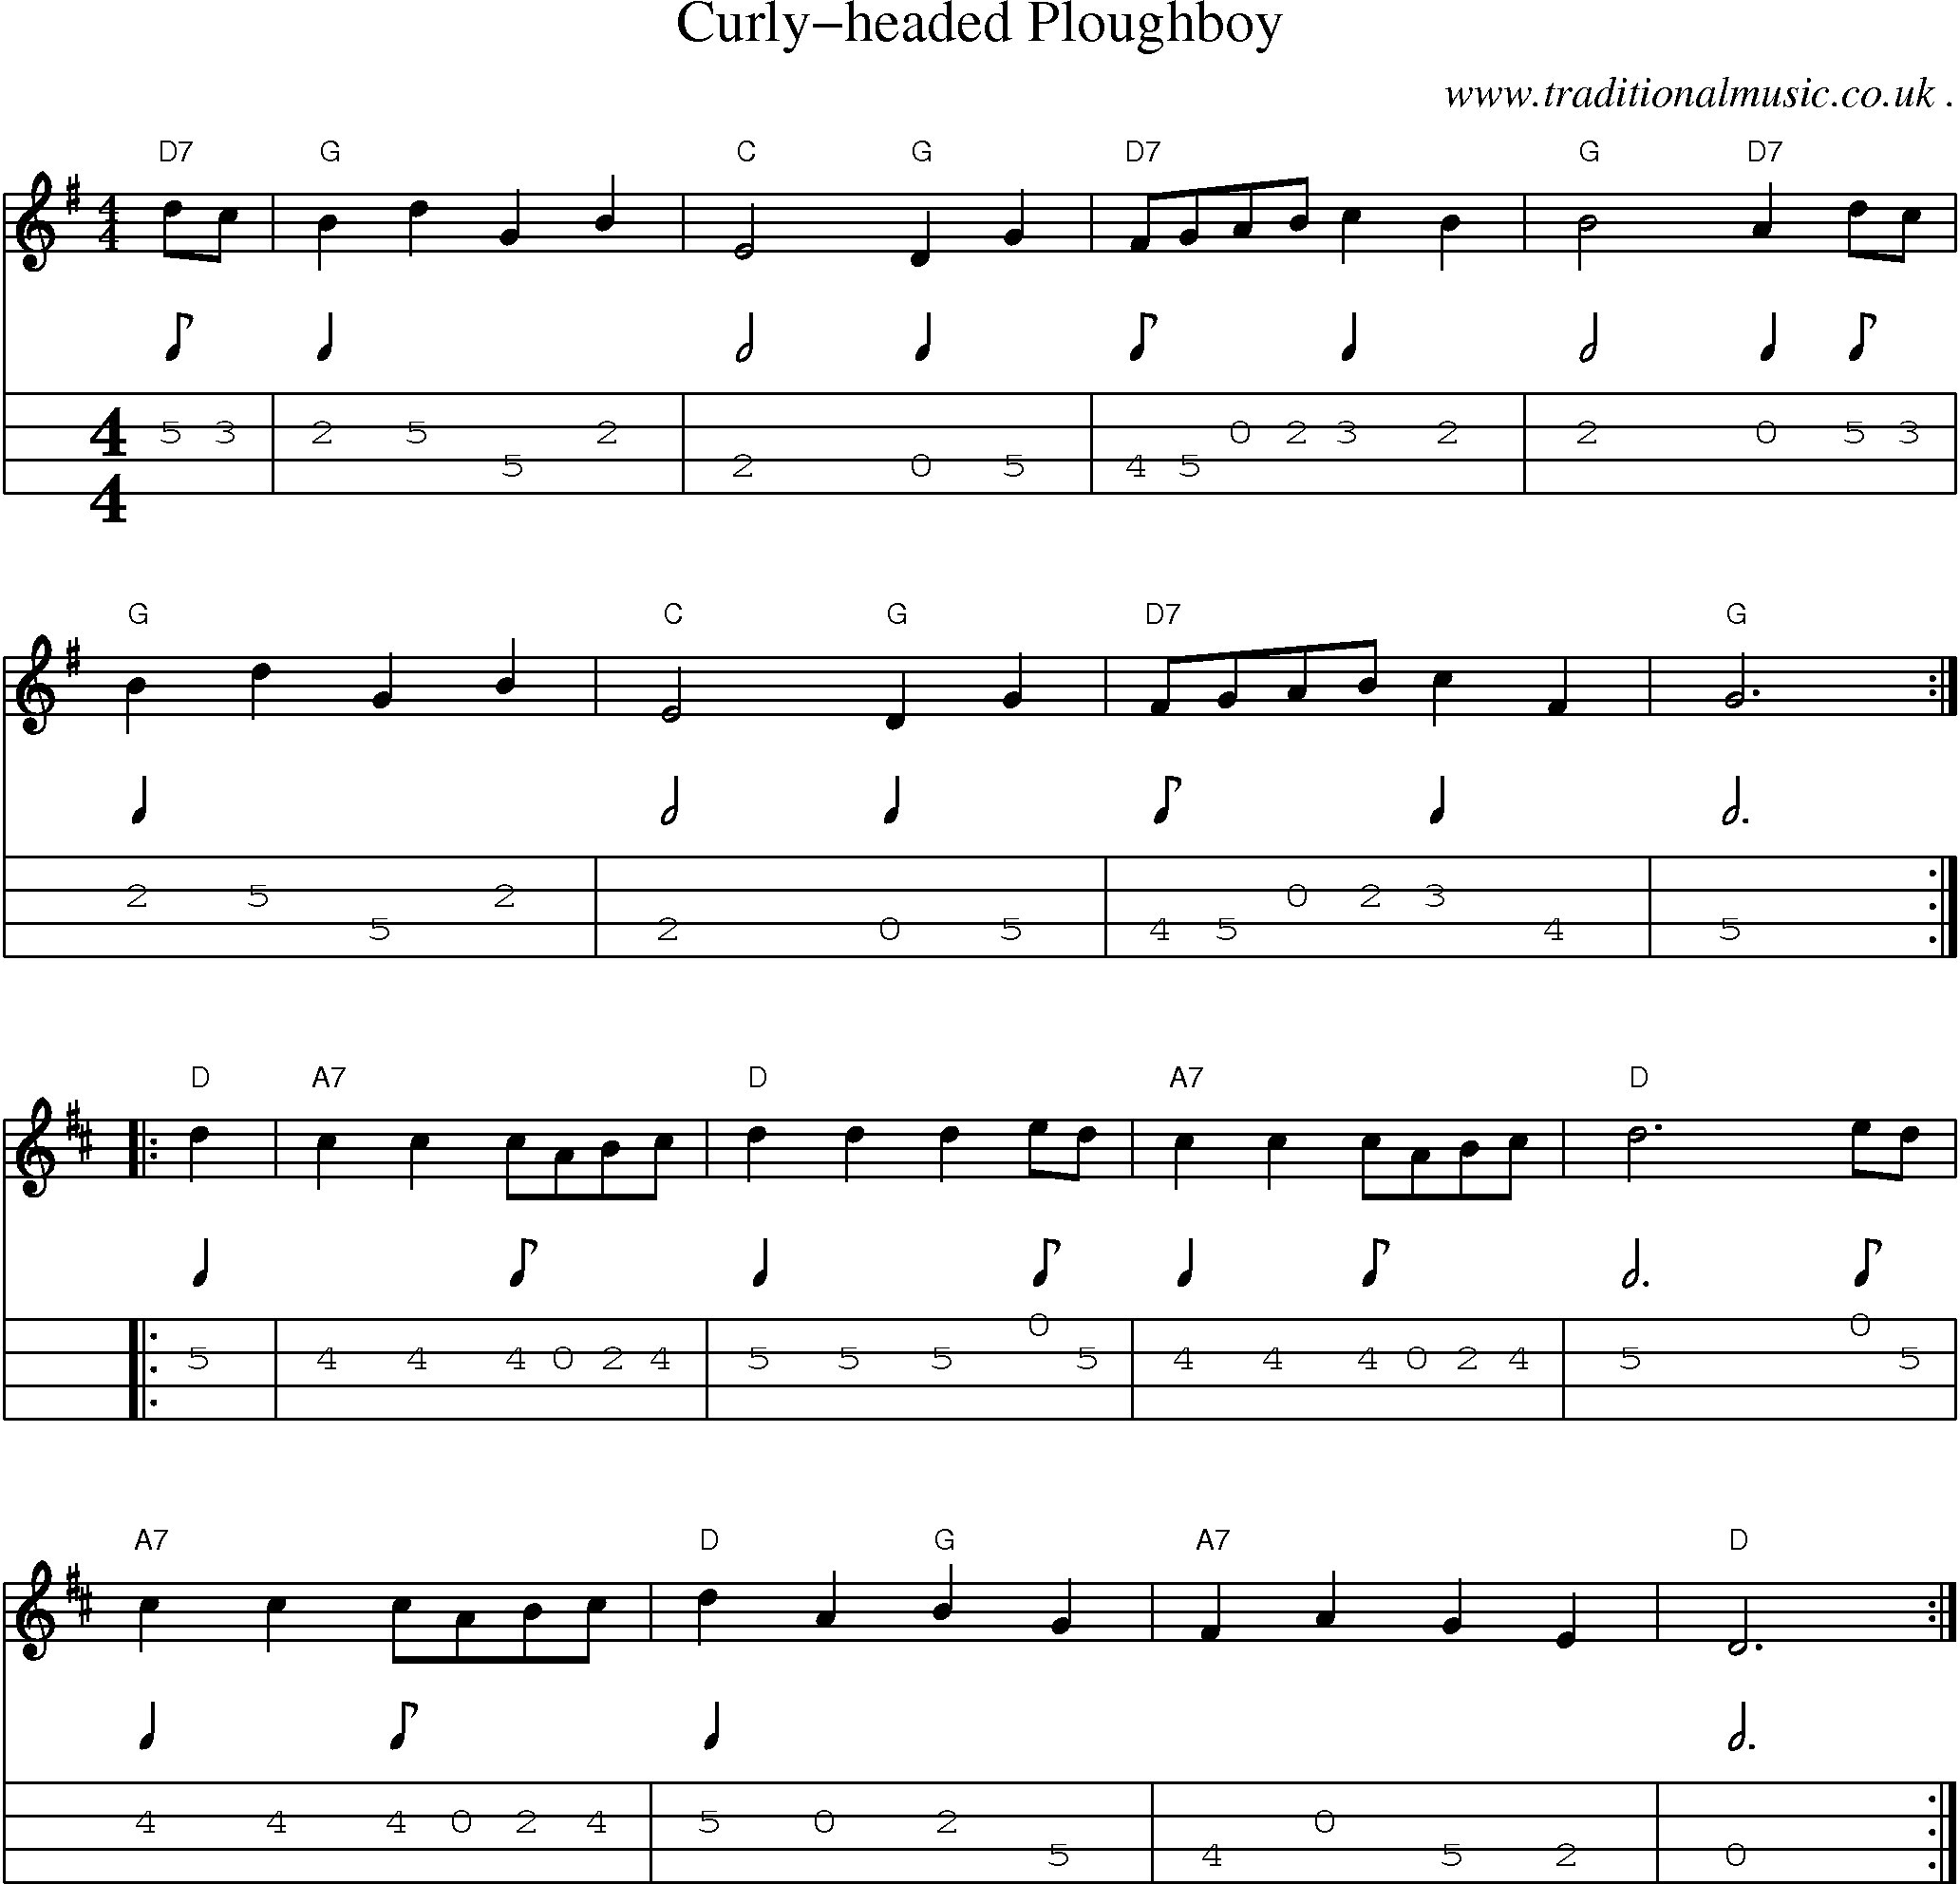 Sheet-Music and Mandolin Tabs for Curly-headed Ploughboy